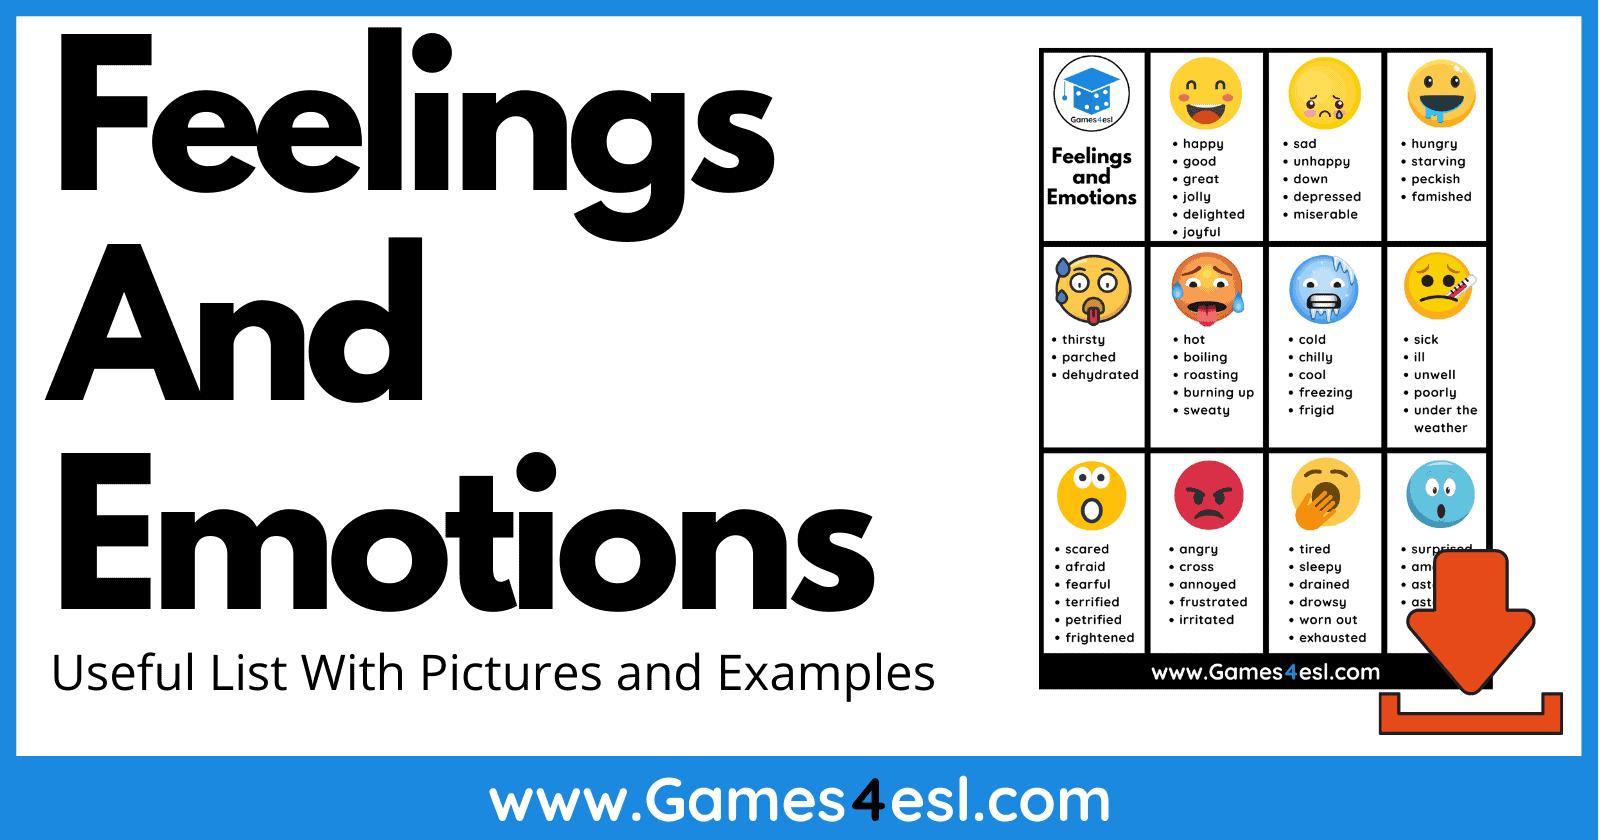 Feelings And Emotions in English